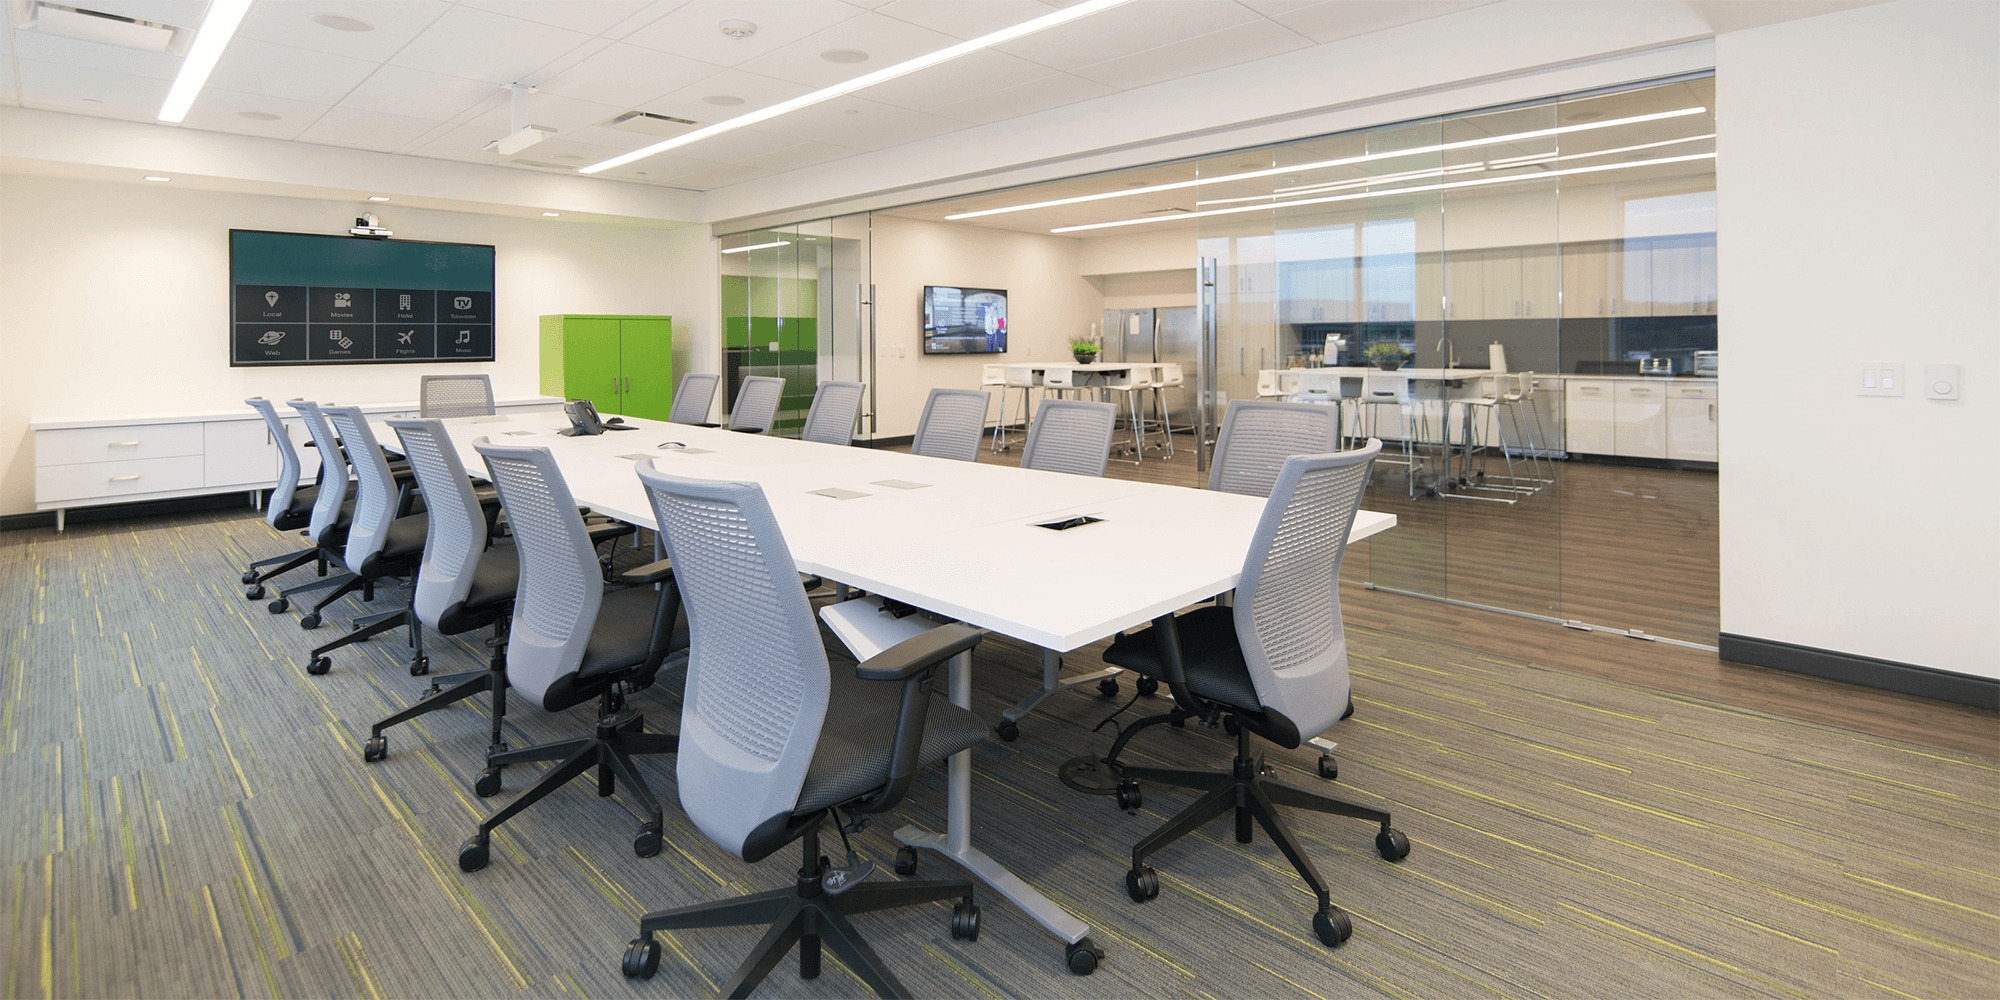 large conference room with a TV display, and a large table with dresk chairs